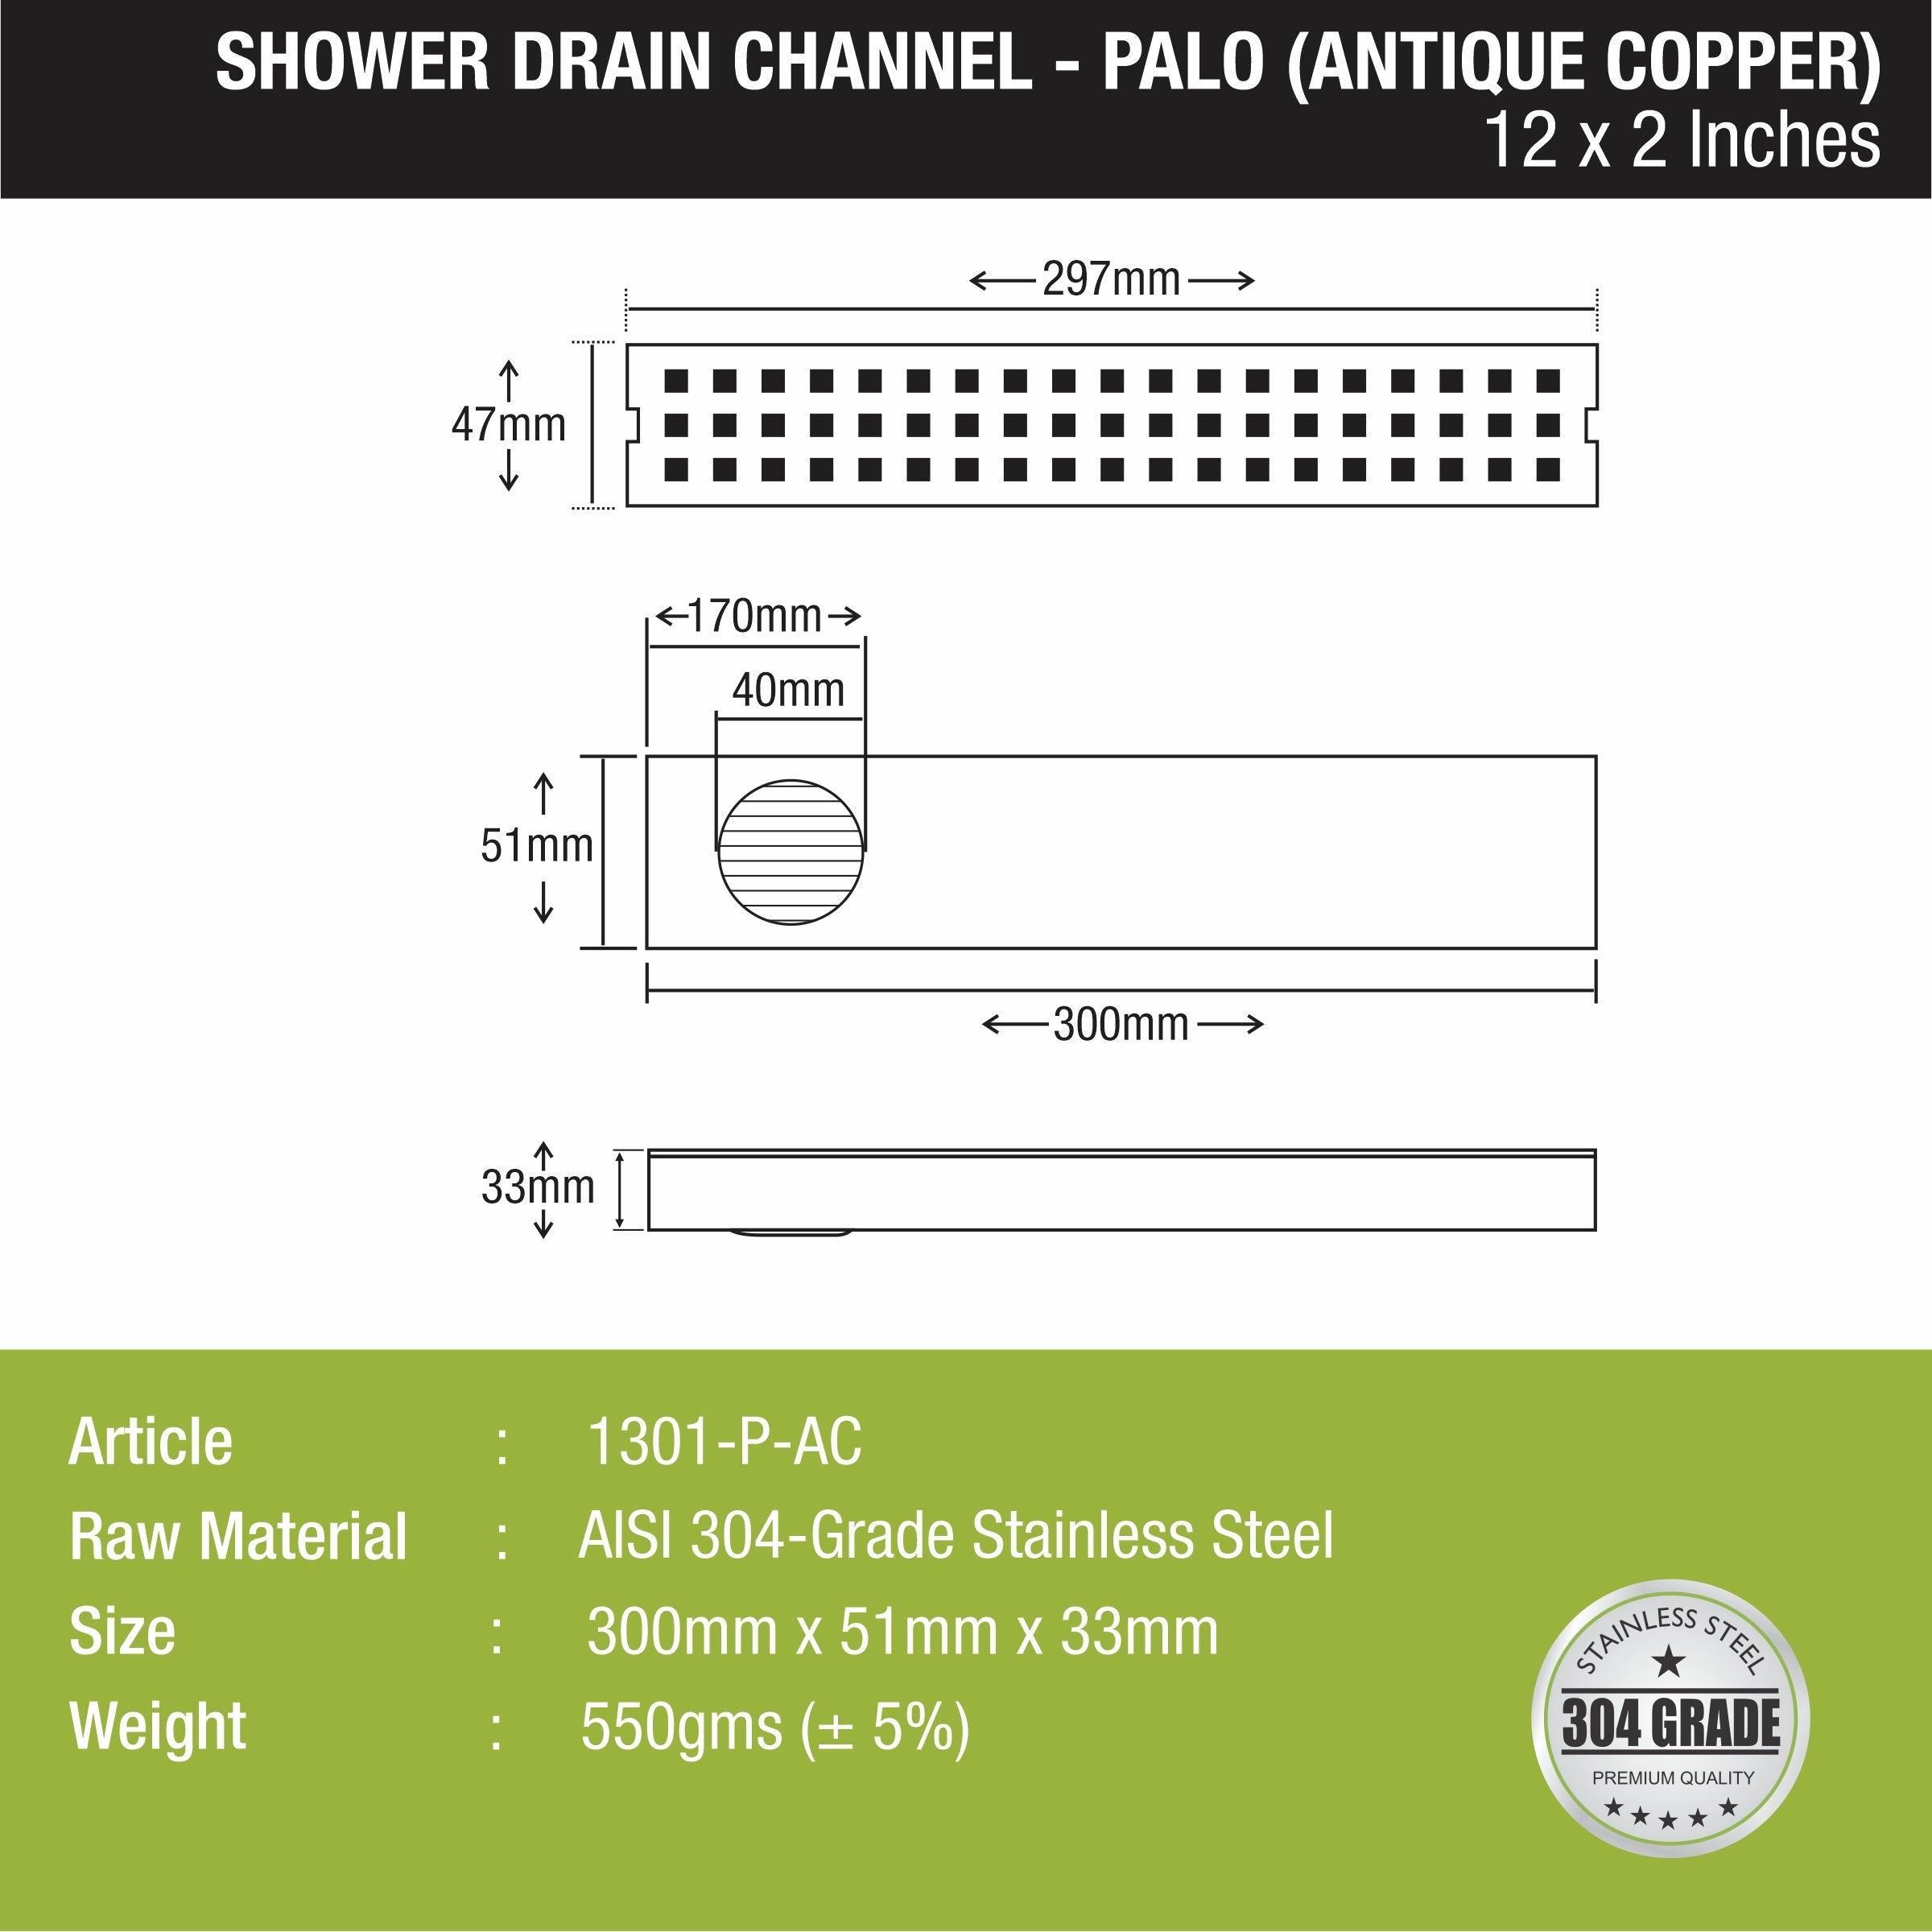 Palo Shower Drain Channel - Antique Copper (12 x 2 Inches) sizes and dimensions